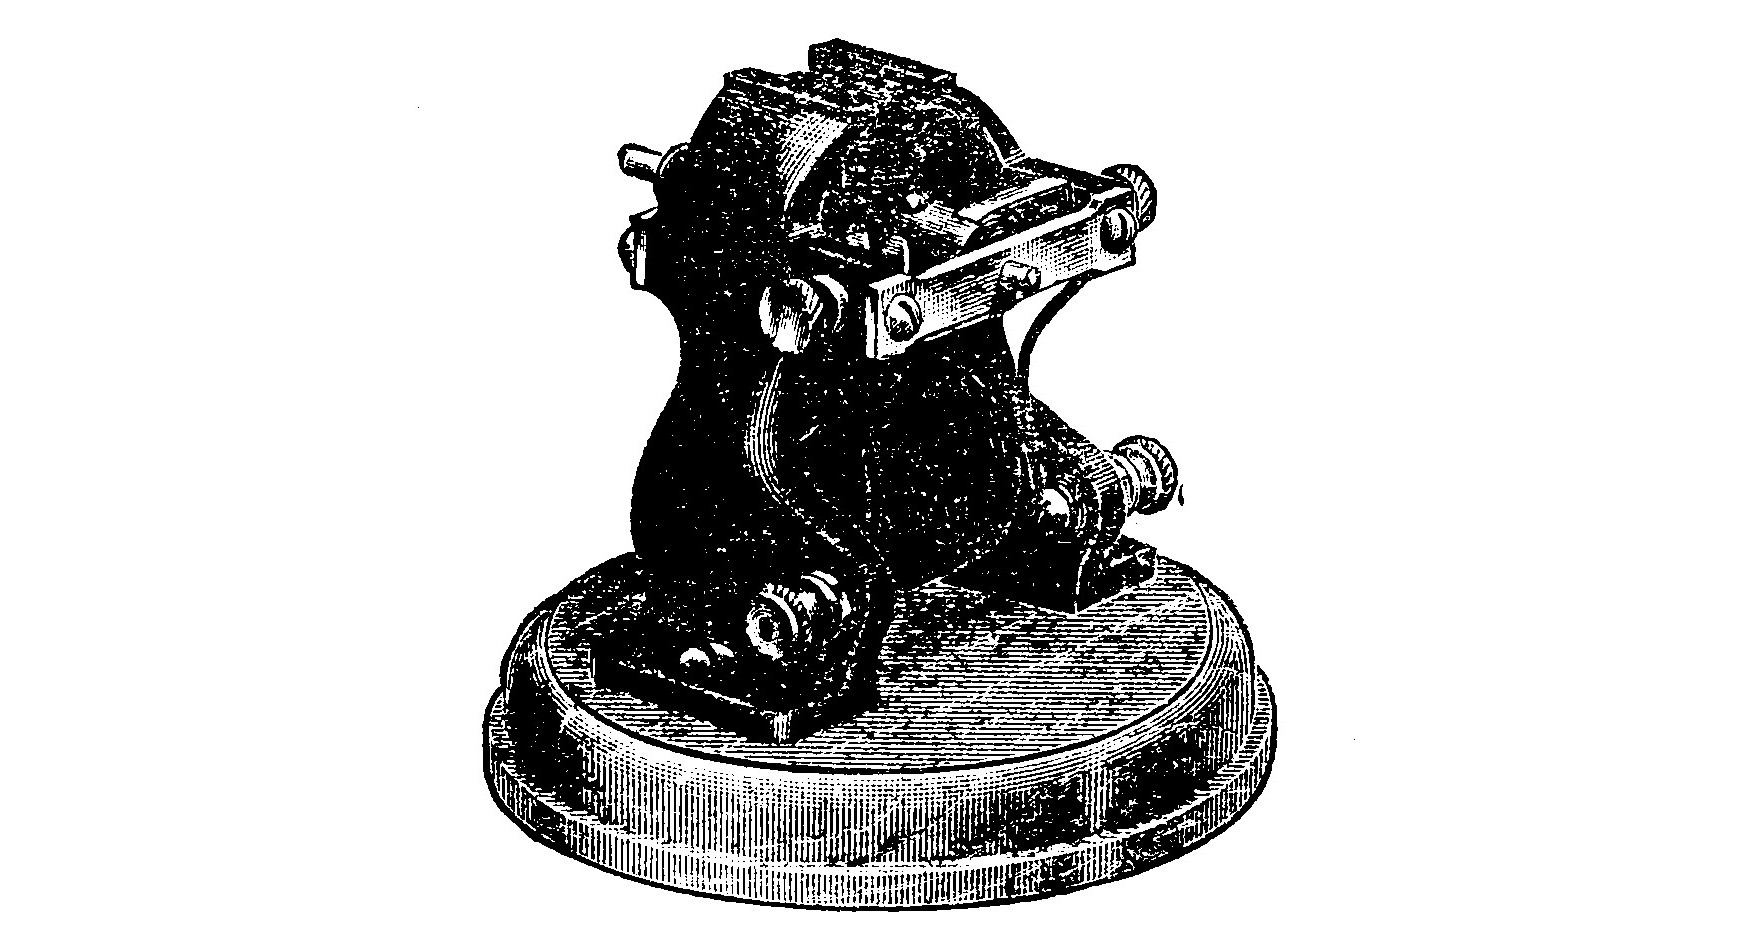 FIG. 48.—A well known Three-pole Battery Motor.